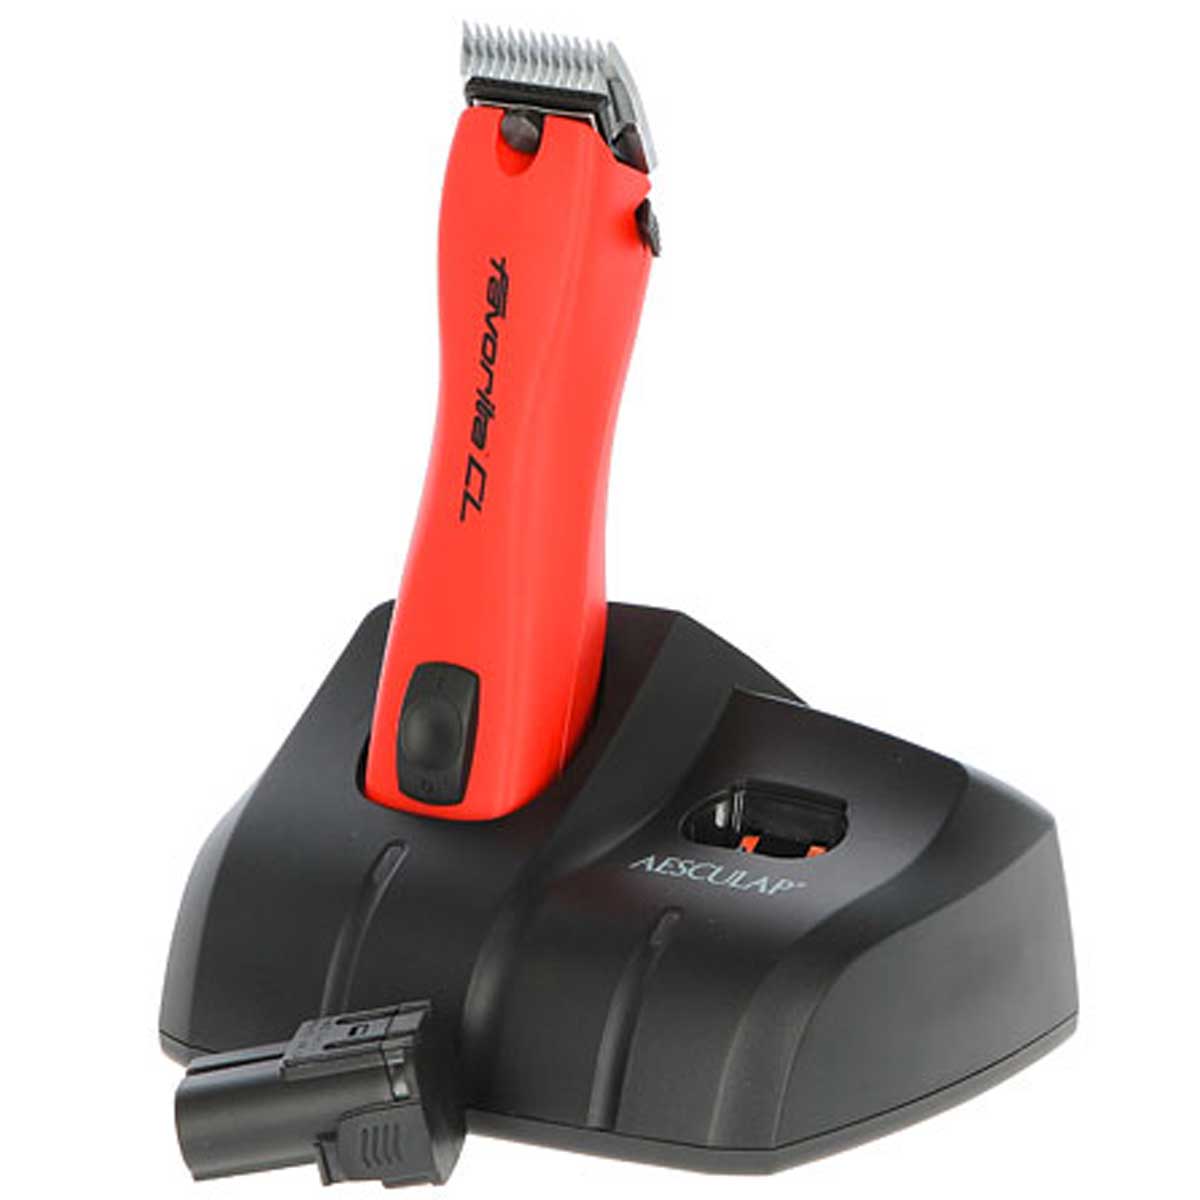 Aesculap Favorita CL Clipper 2x battery with attachment comb set